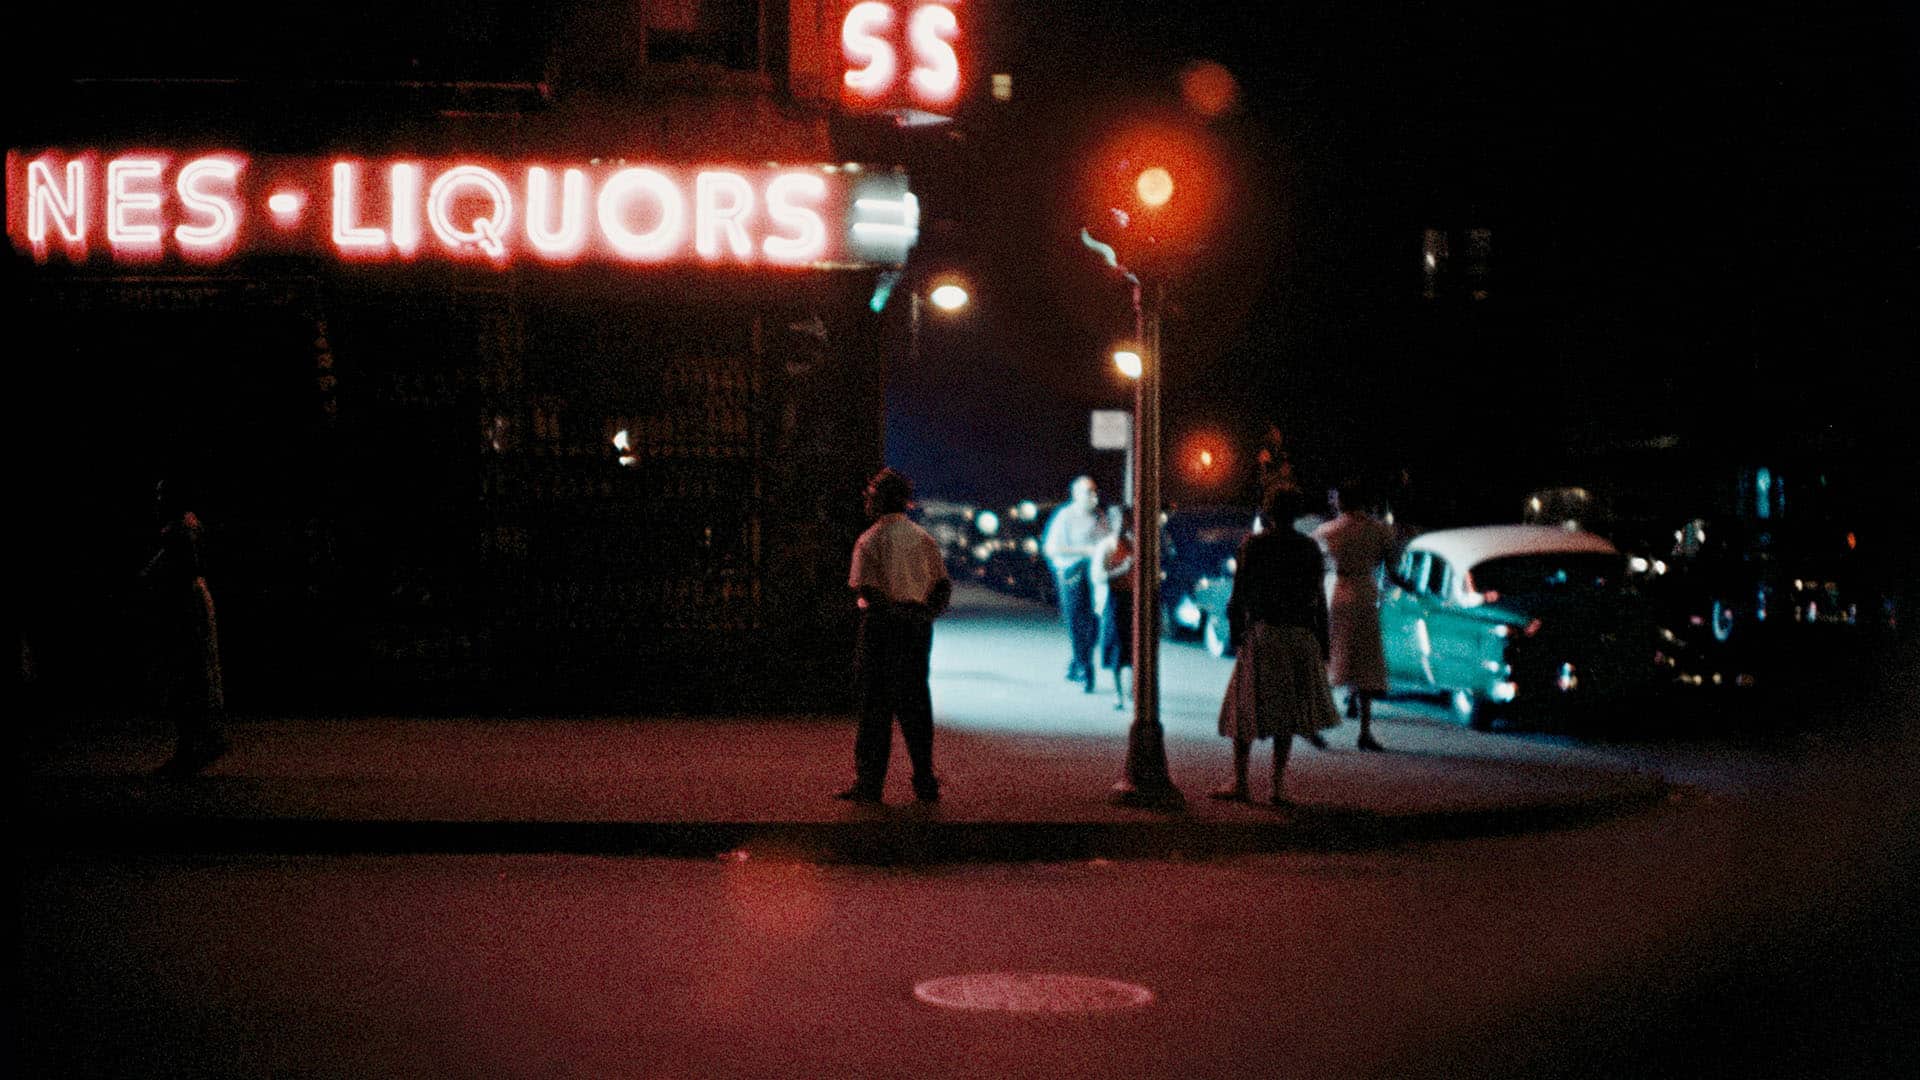 Six Pictures: Gordon Parks’ “Atmosphere of Crime”